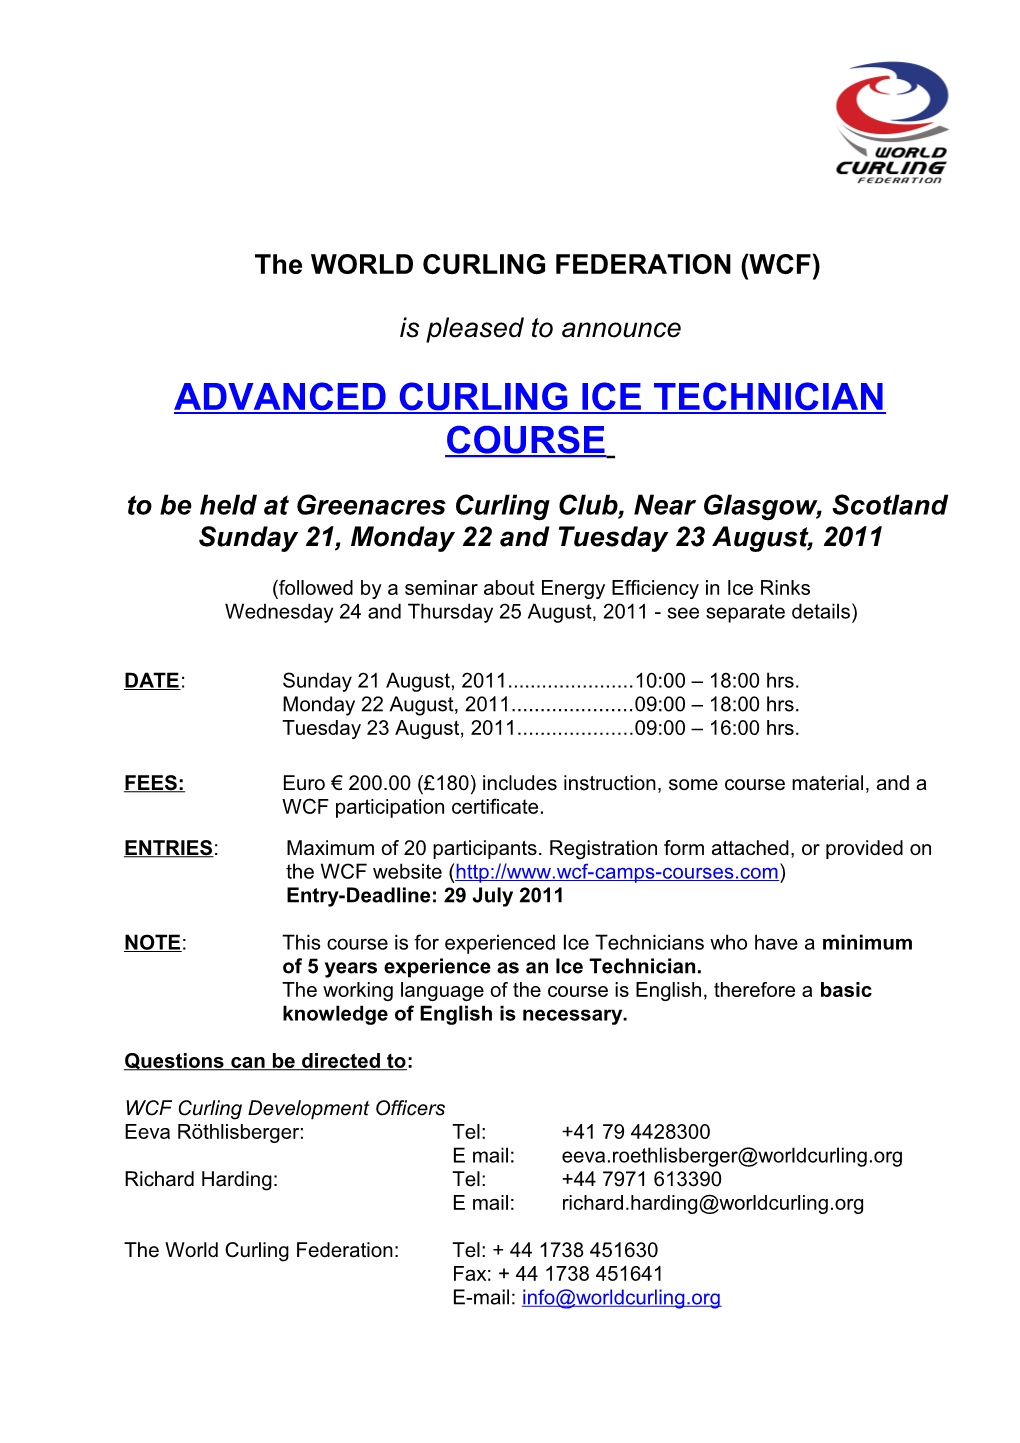 The WORLD CURLING FEDERATION (WCF) And